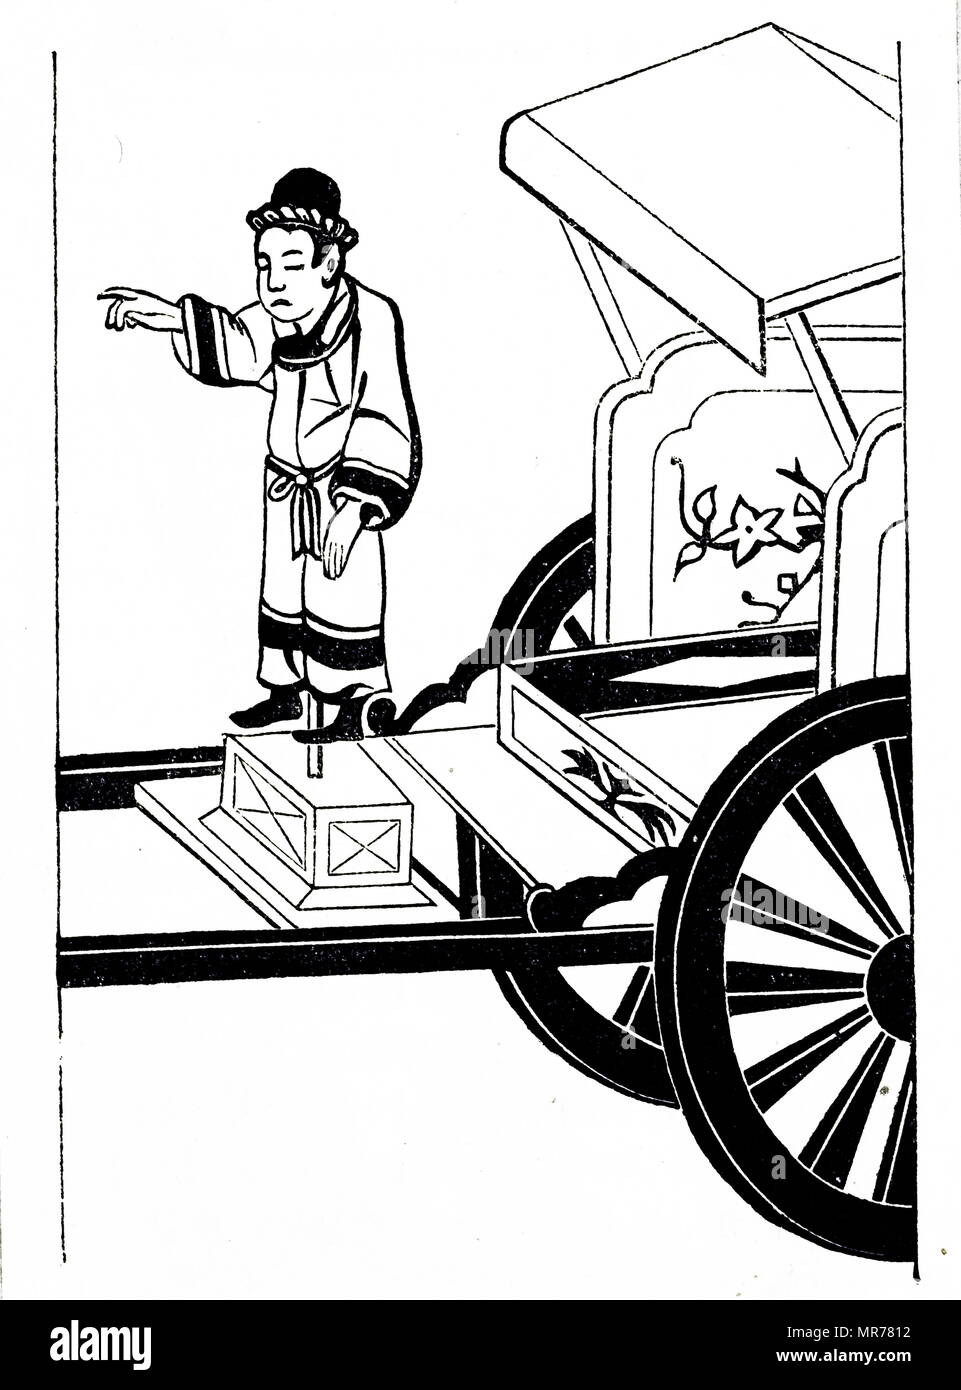 Chinese magnetic chariot. The arm of the figure always pointed south. 1870. The south-pointing chariot (or carriage) was an ancient Chinese, two-wheeled vehicle, that carried a movable pointer to indicate the south, no matter how the chariot turned. The chariot was supposedly used as a compass for navigation and may also have had other purposes. Stock Photo